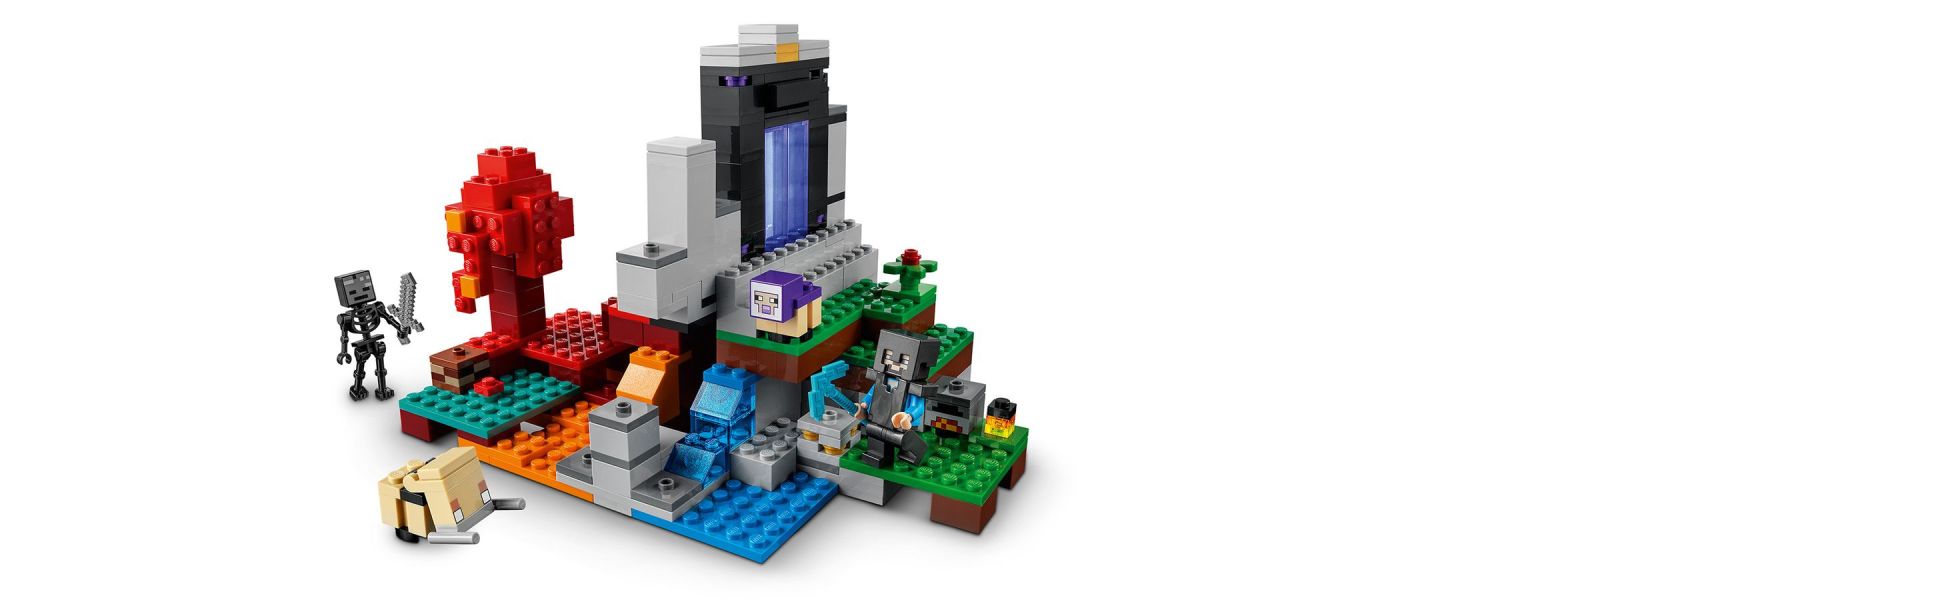 LEGO Minecraft The Ruined Portal Building Toy 21172 with Steve and Wither  Skeleton Figures, Gift Idea for 8 Plus Year Old Kids, Boys & Girls